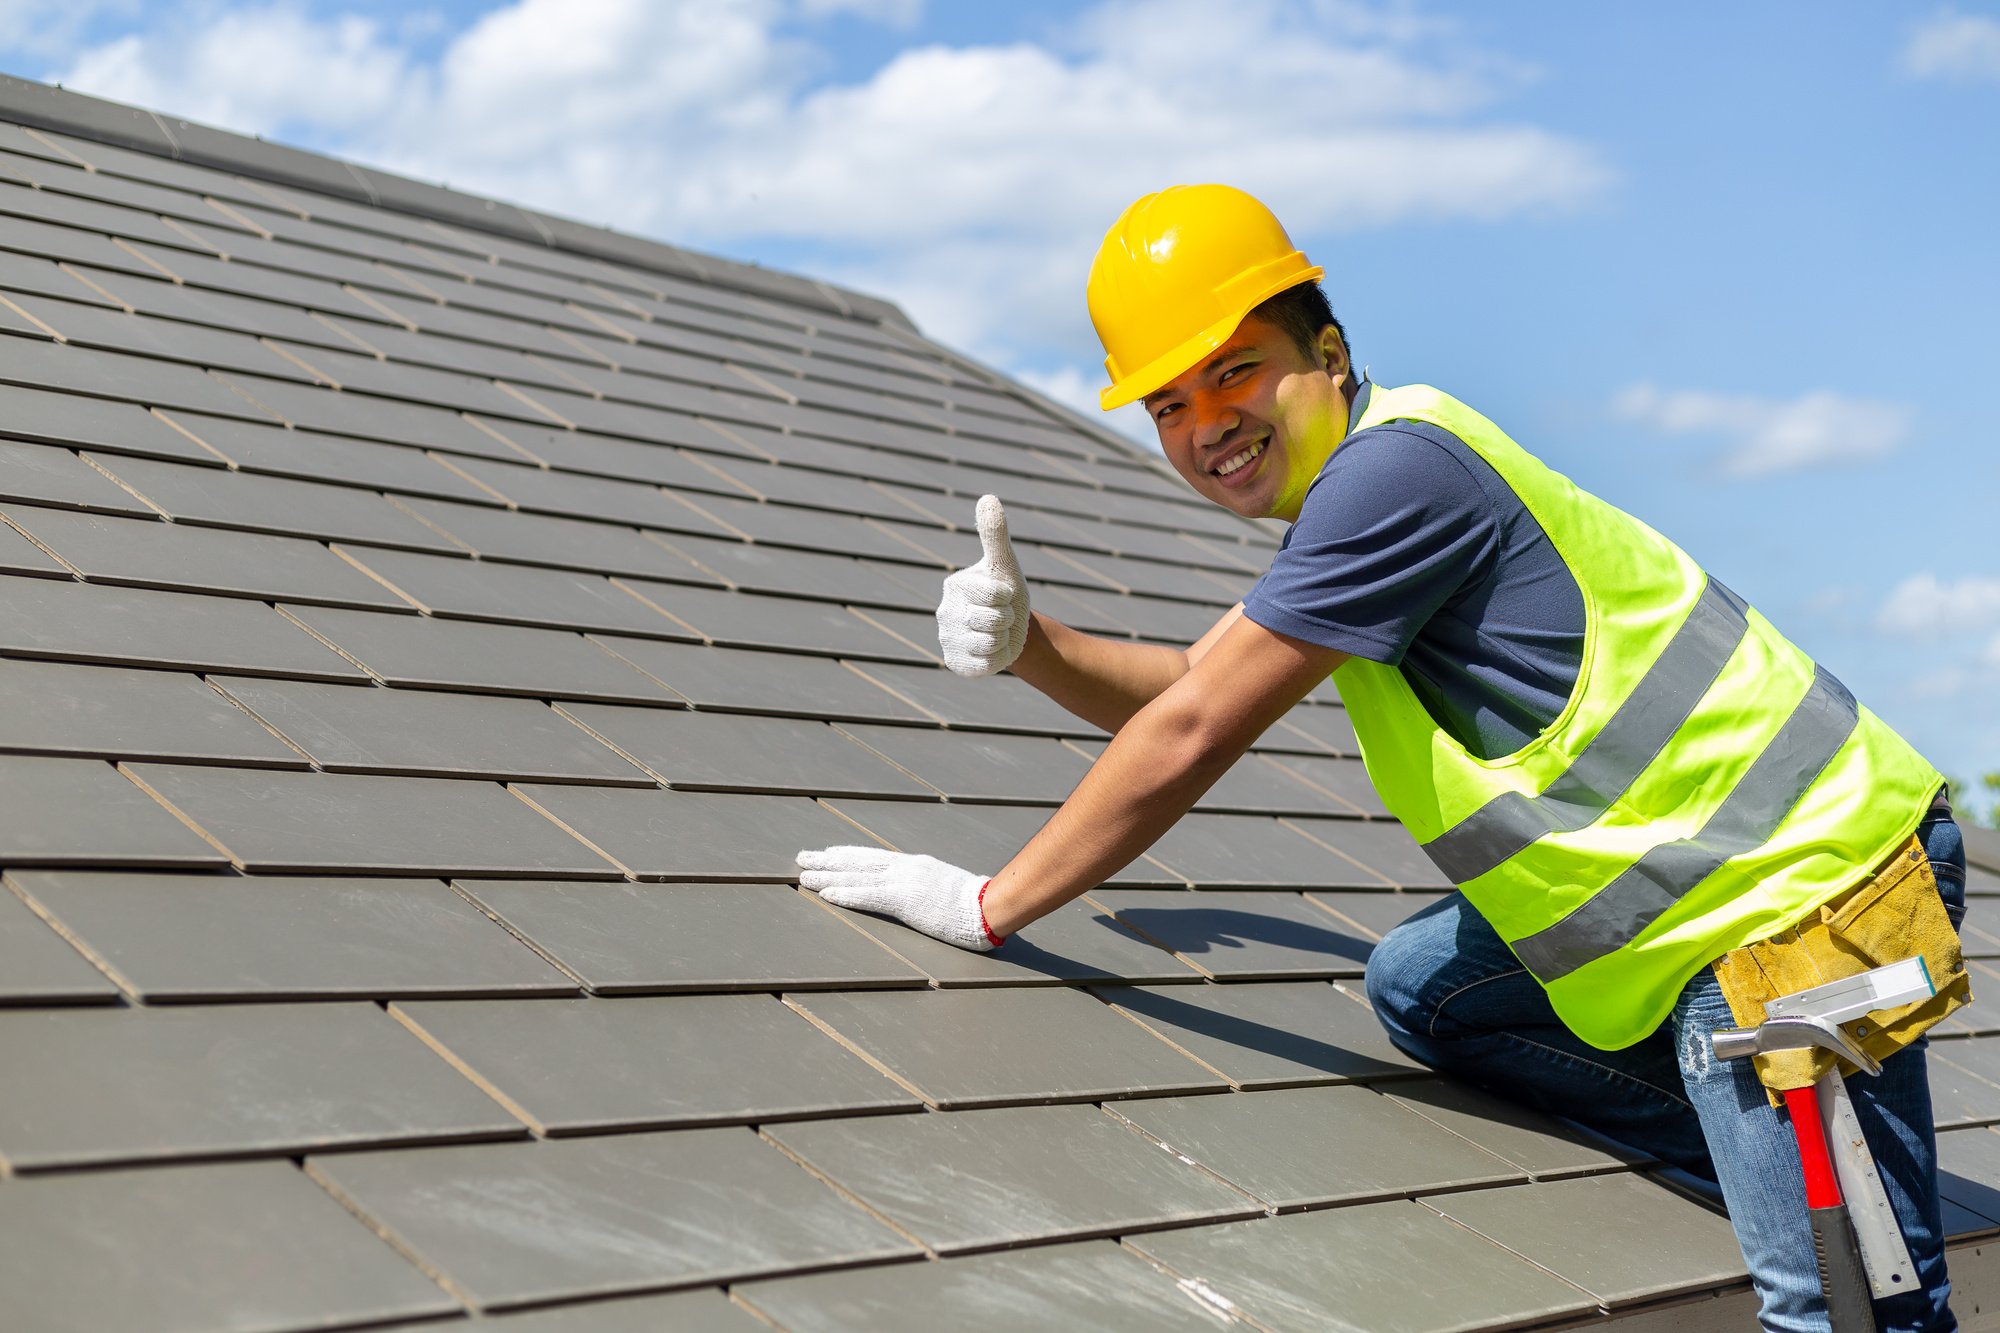 If you want to hire quality roofers for repairs or a replacement, learn five qualities to look for by reading this quick guide.